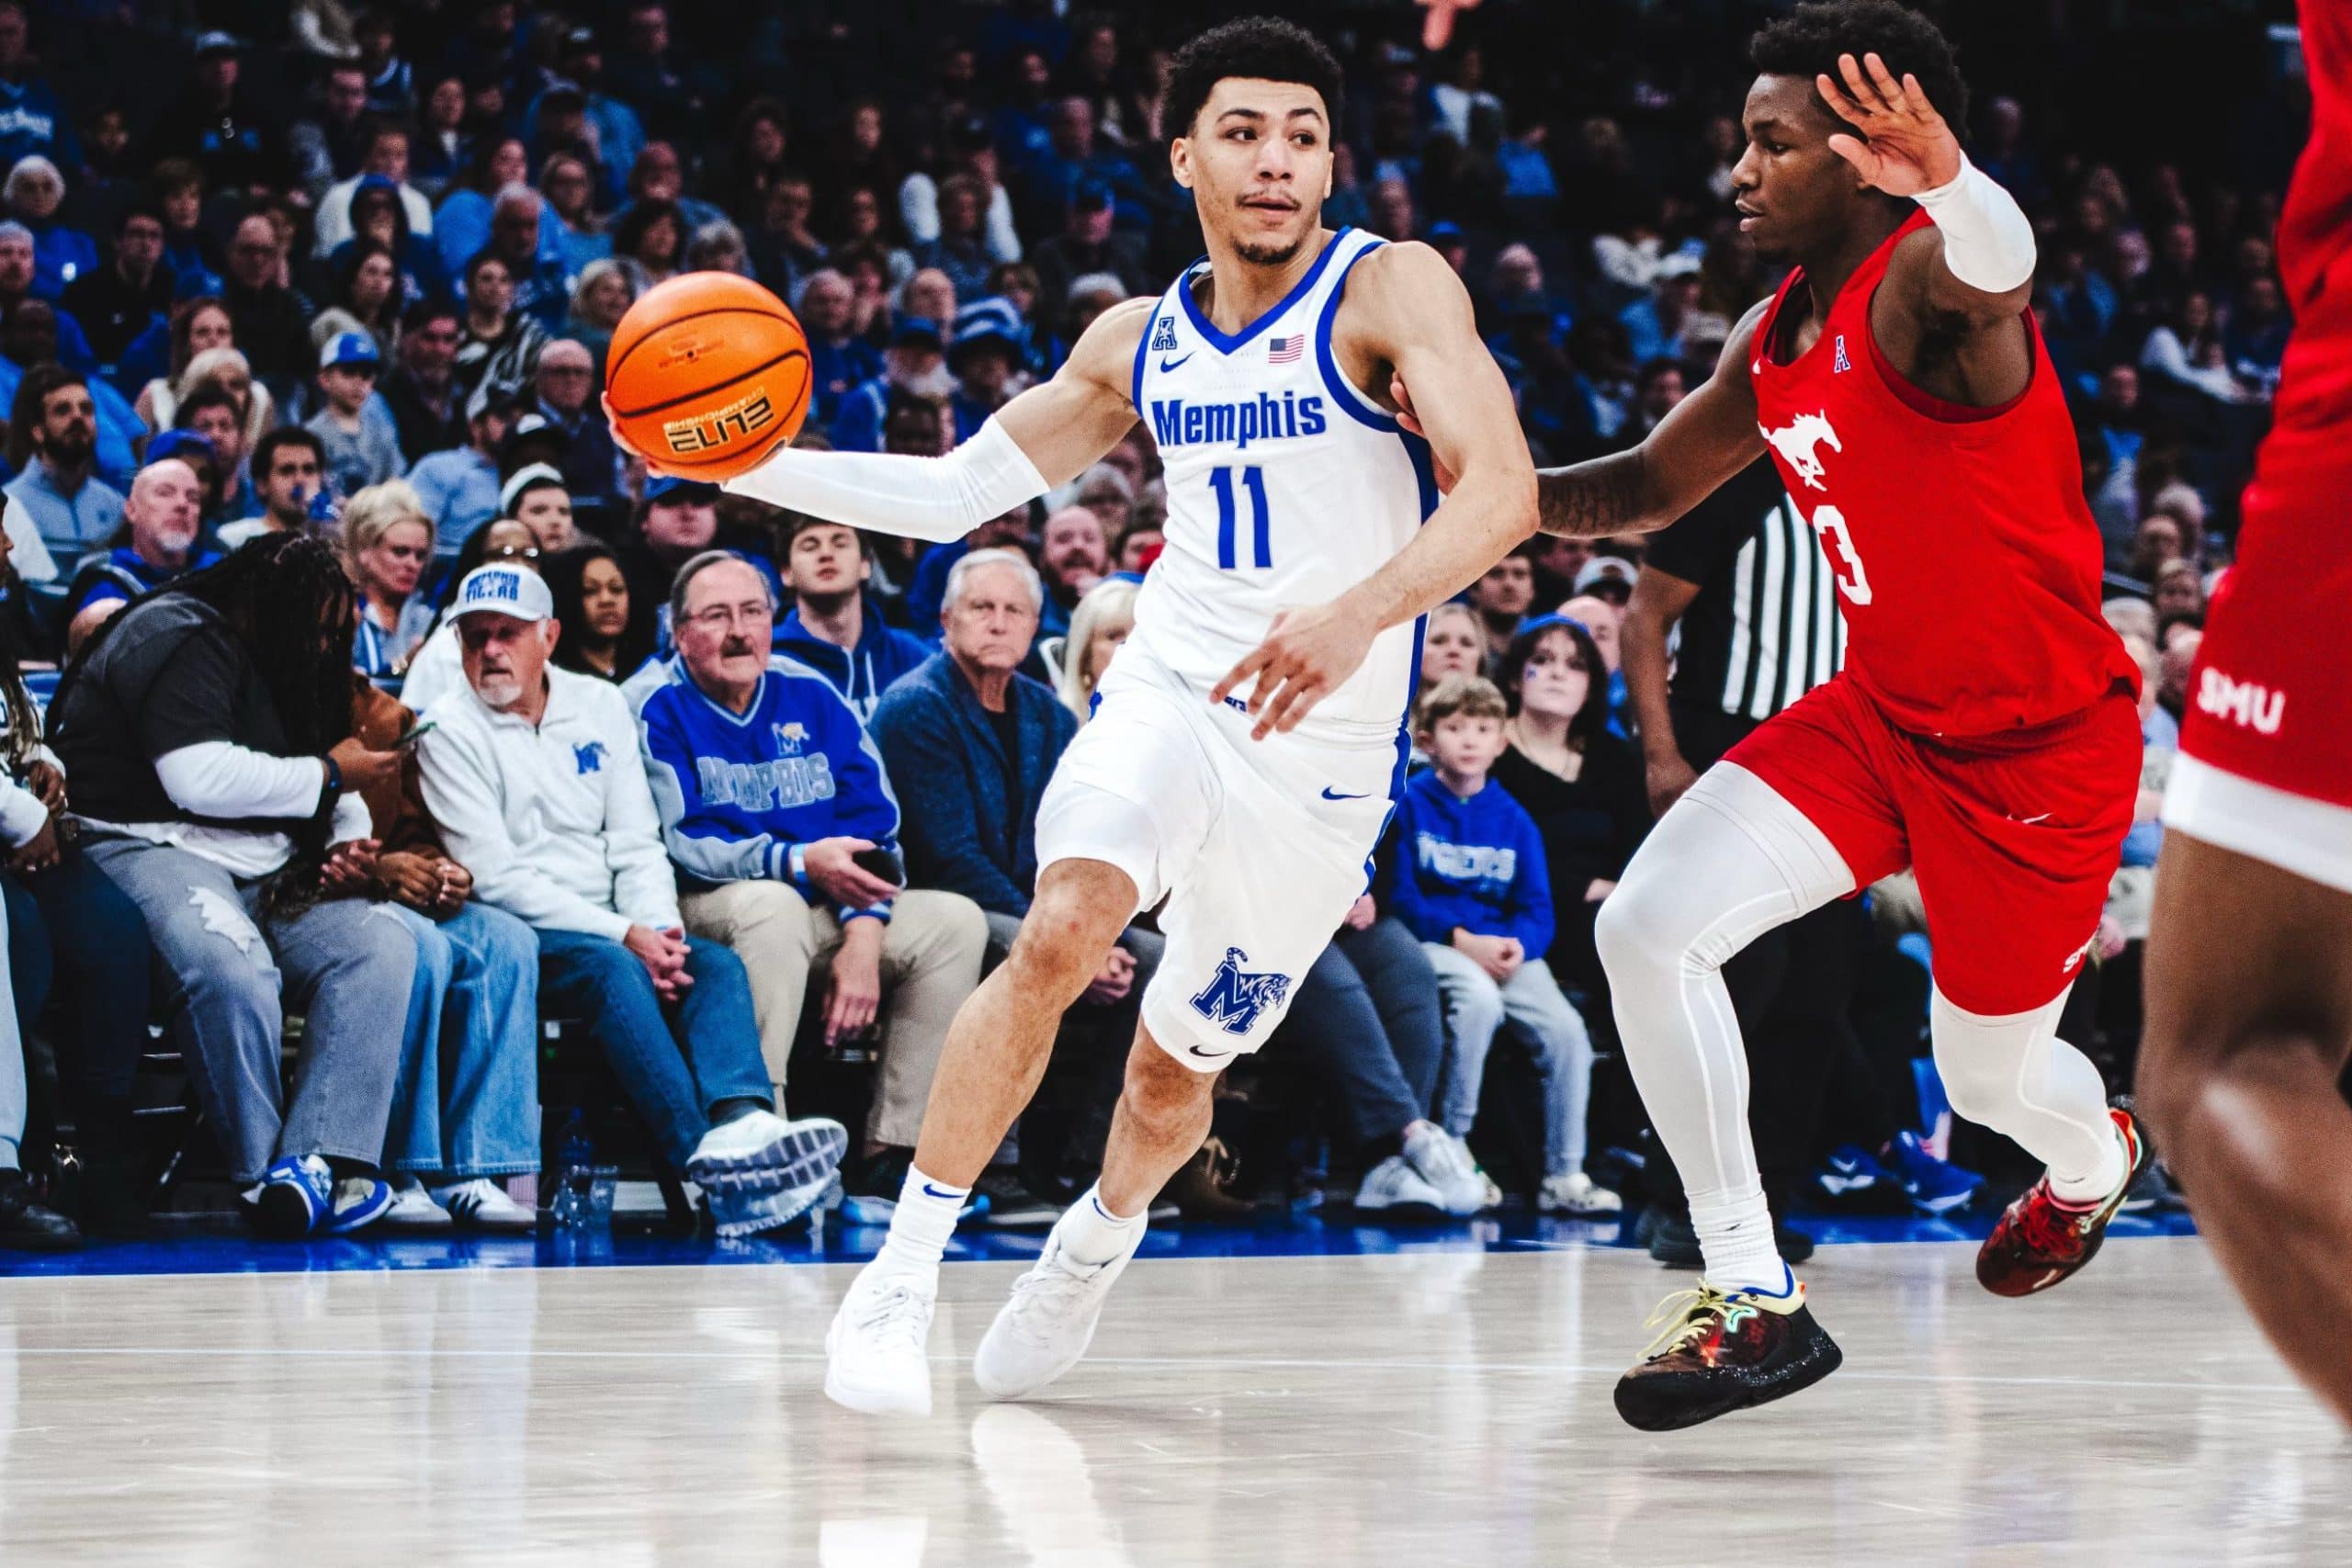 Featured image for “RECAP: Jahvon Quinerly buries second-straight game-winning 3-pointer to lift No. 15 Memphis past SMU in Sunday matinee”